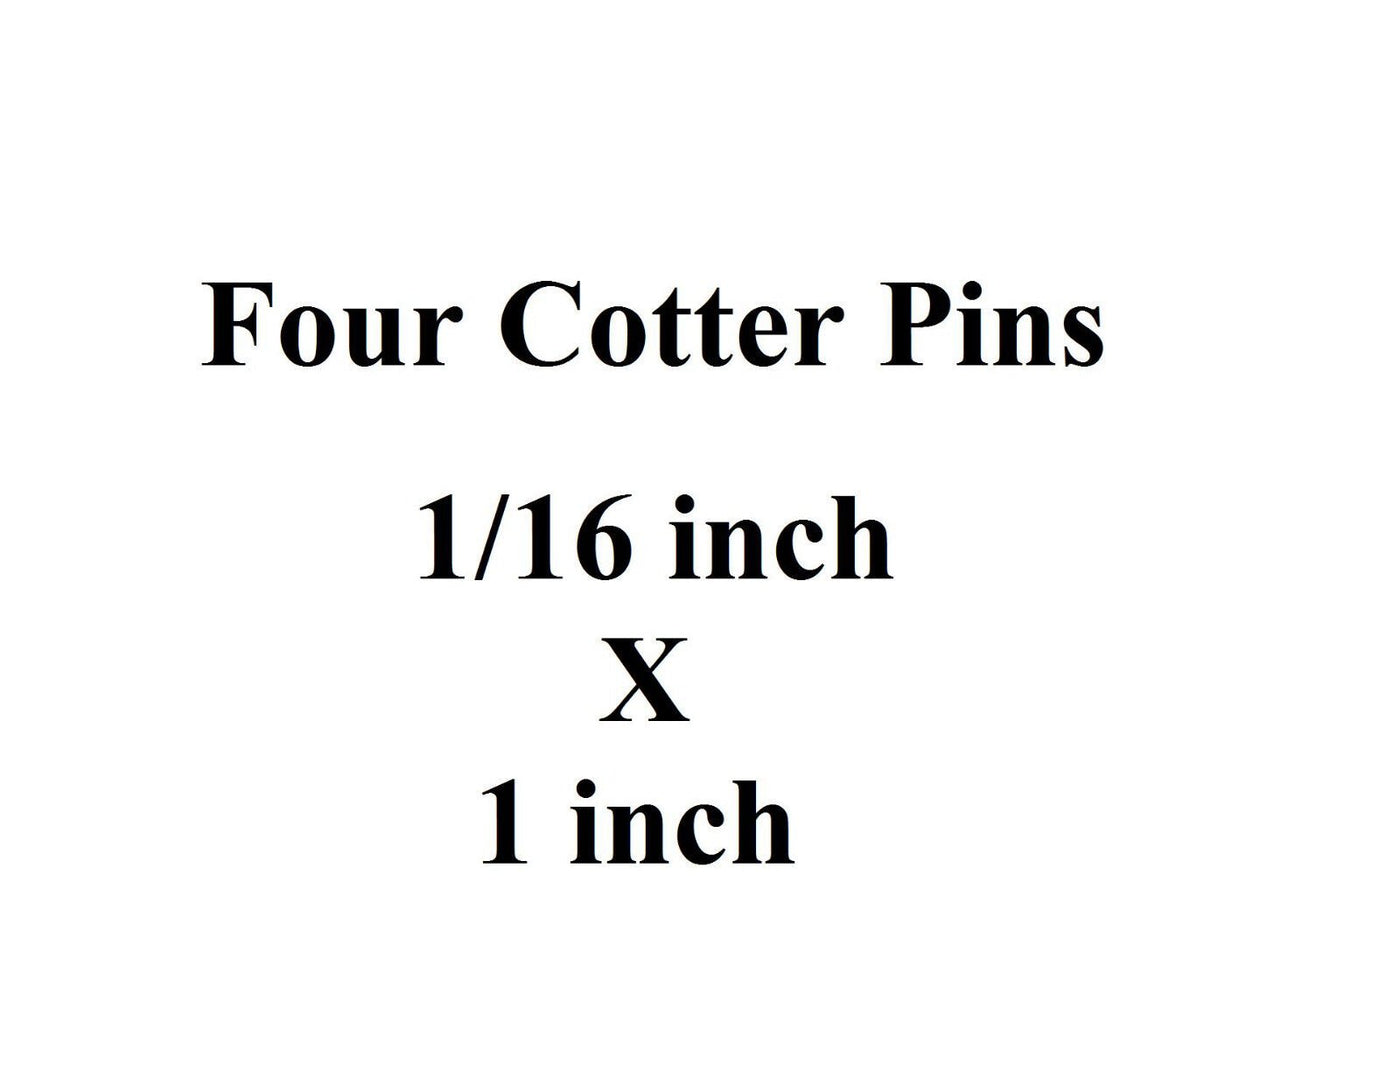 Cotter Split Pin ~ 1/16 inch x 1 inch ~ Extra Long ~ Zinc Plated ~ 4 Pack